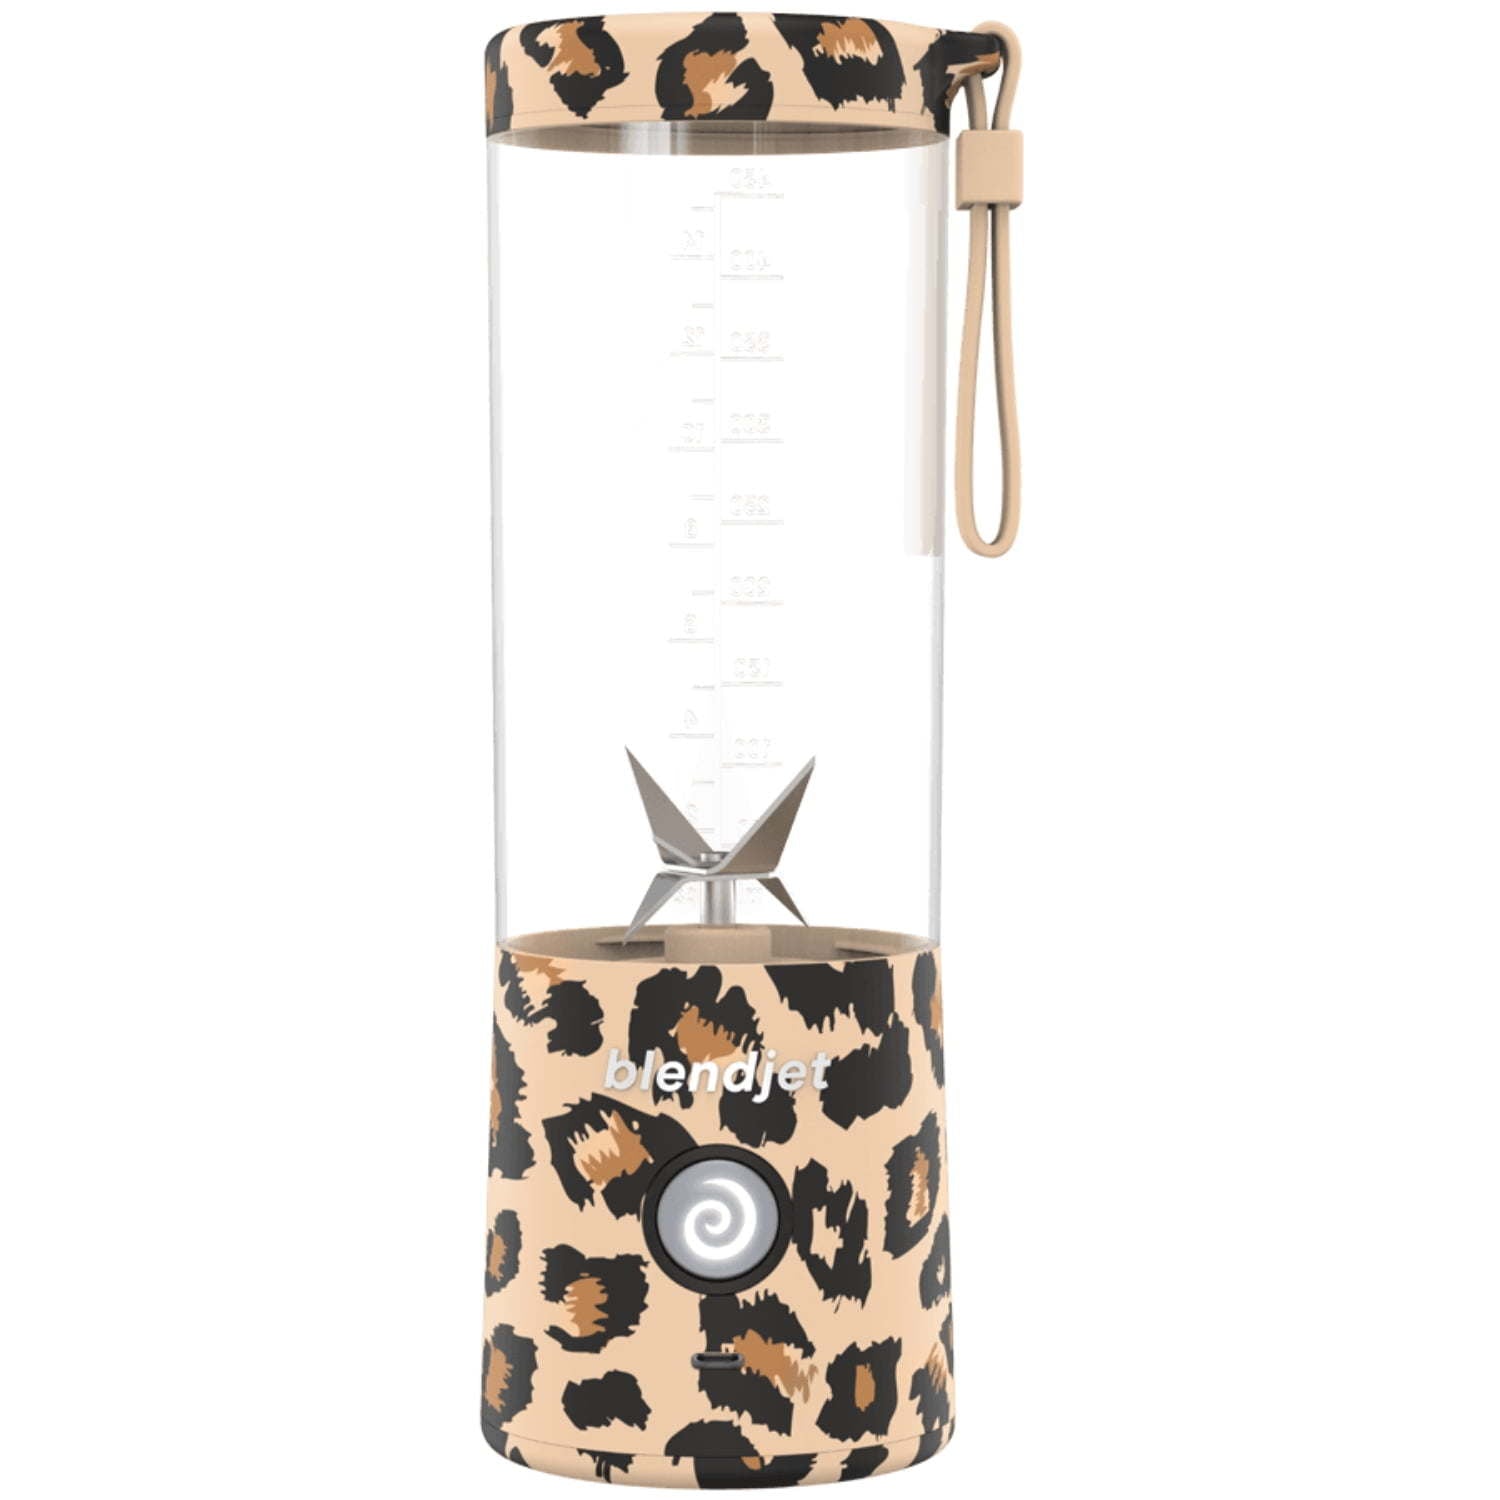 The Original Portable Blender, 16 oz with a leopard print handle, perfect for making smoothies on the go.